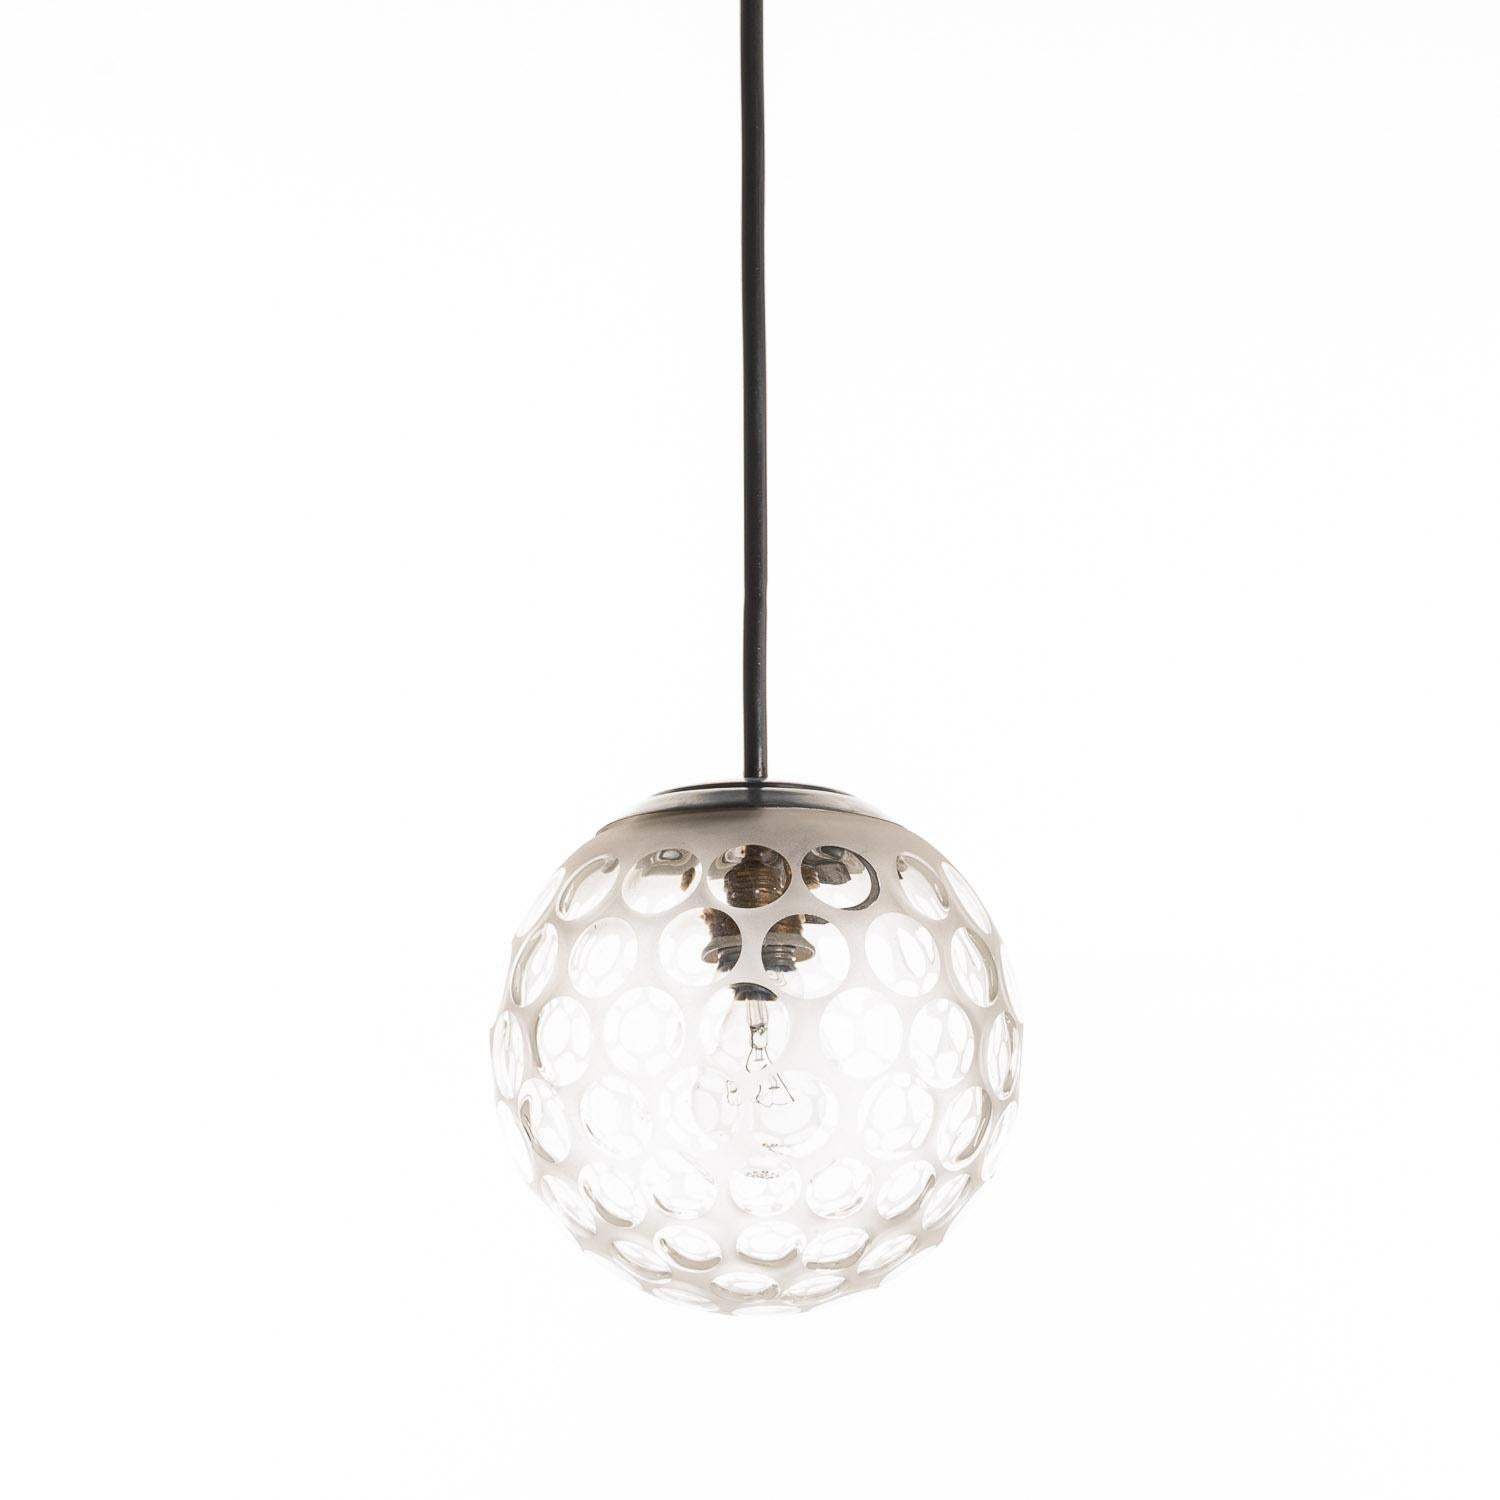 Fun Italian sphere pendant with a playful motif. Attributed to Lenti by Carlo scarpa for Venini